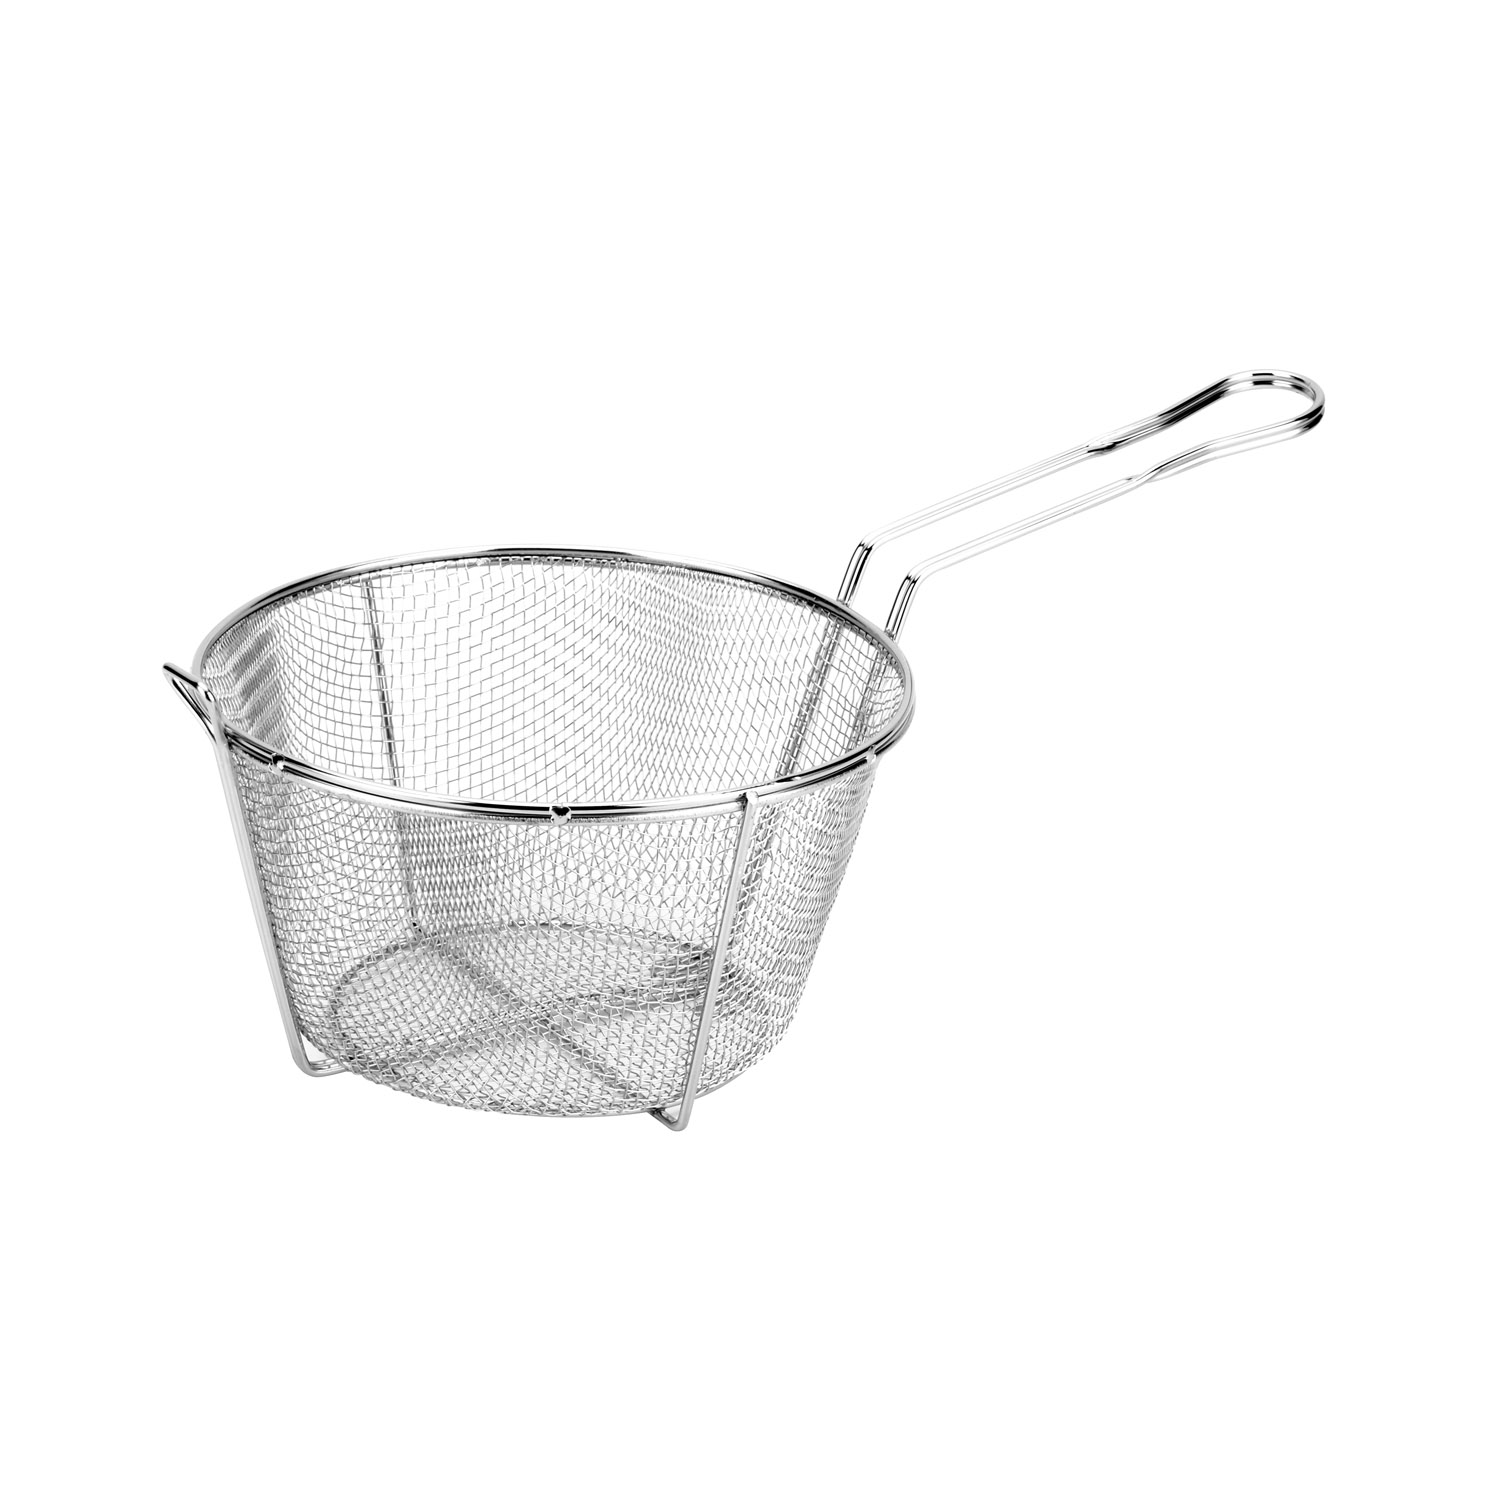 CAC China FBR8-009 Nickel-Plated Fry Basket, 1/8" Mesh Wire 9-1/2"Dia